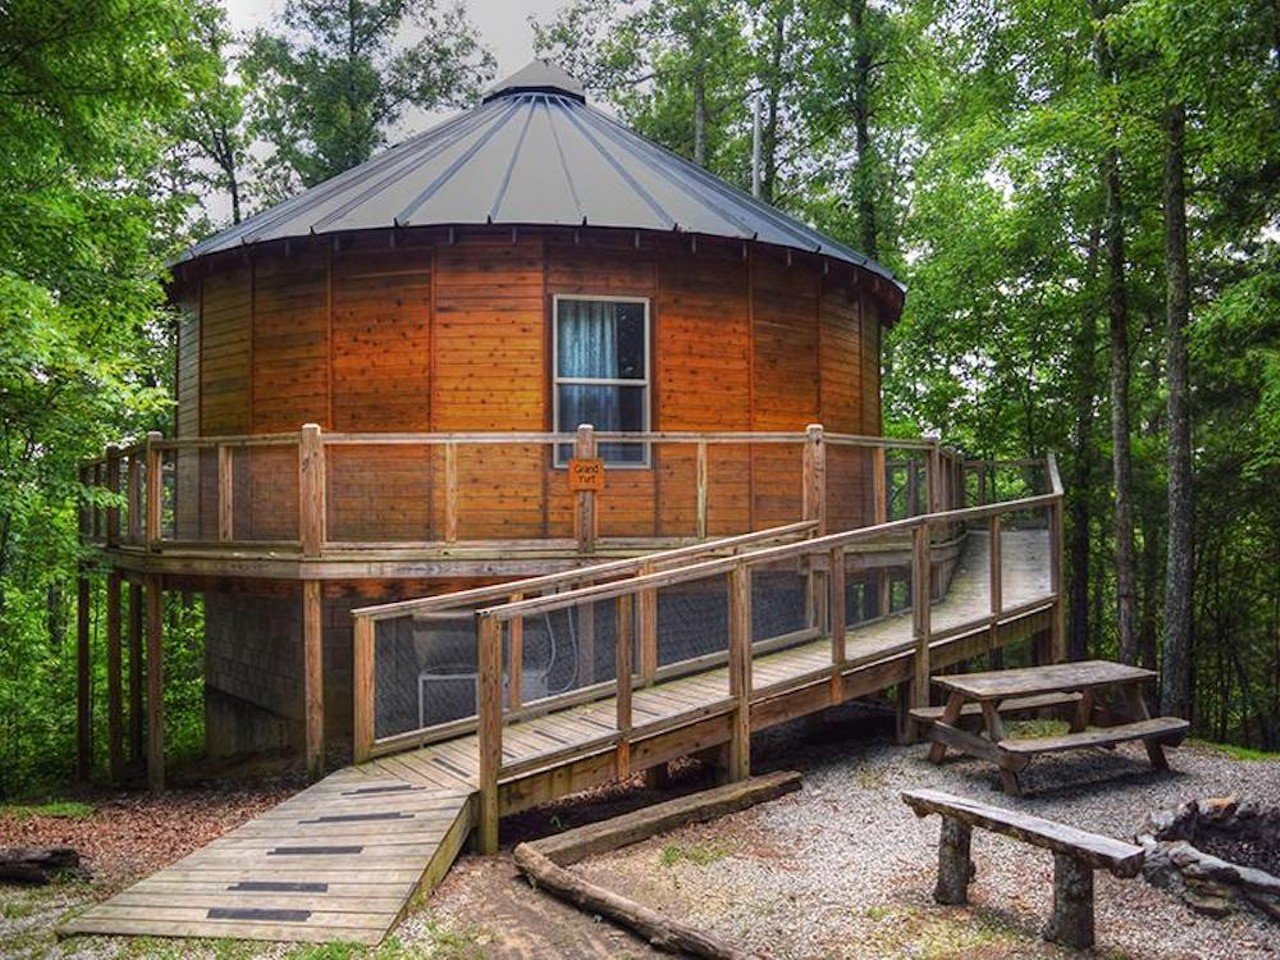 Yurt it up at Red River Gorge
Campton, Kentucky
In Red River Gorge, you can rough it, glamp, sleep up high in a luxury tree house &#151; or, you can book a yurt for $150 a night. These insulated vacation homes available for booking through Red River Gorge Cabin Rentals have different rooms, furnishings, round skylights, porches with hot tubs and fire pits.
Photo via facebook.com/RedRiverGorgeCabinRentals